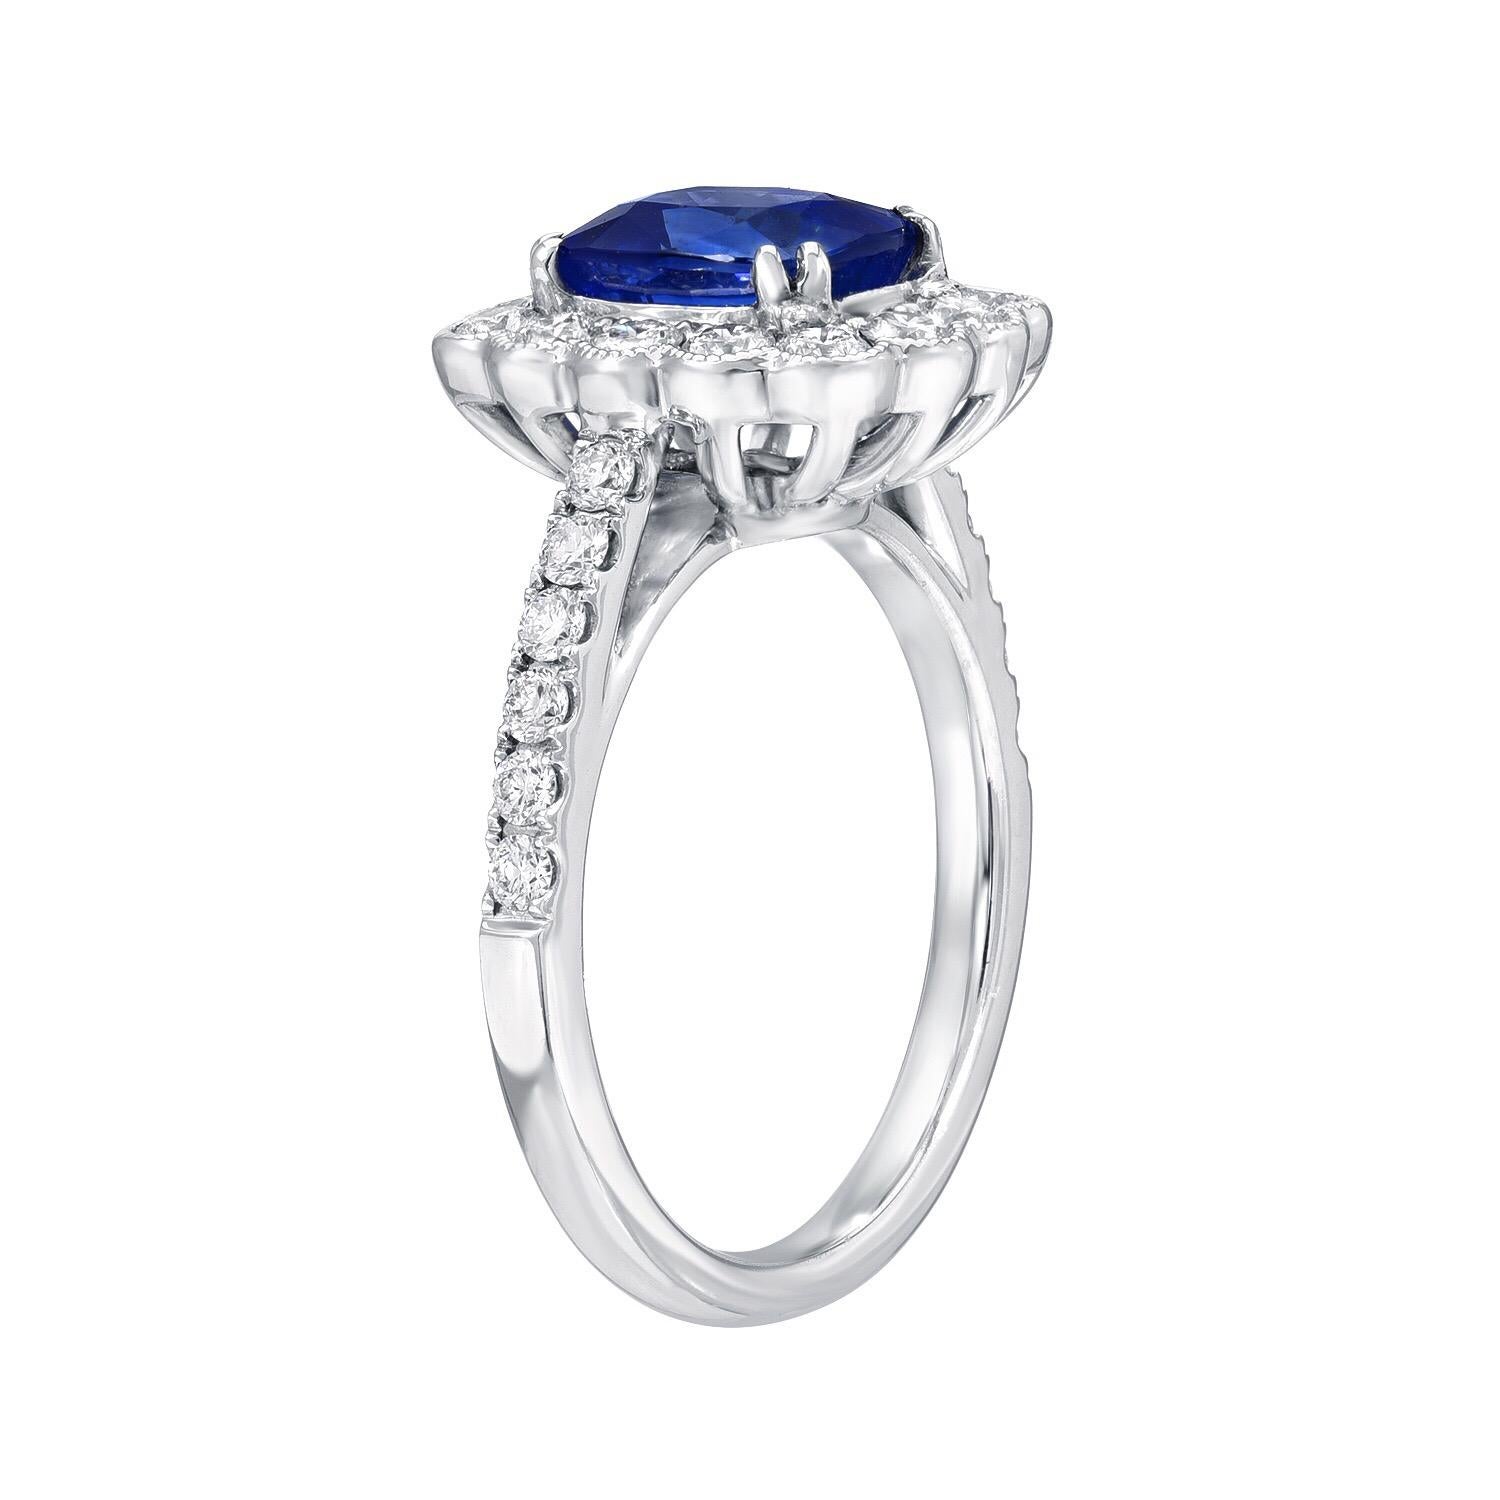 Sapphire ring featuring a 2.20 carat intense blue Sapphire cushion cut, adorned by round brilliant diamonds totaling 0.70 carats, in 18K white gold.
Size 6. Resizing is complementary upon request.
***Returns are accepted and paid by us within 7 days